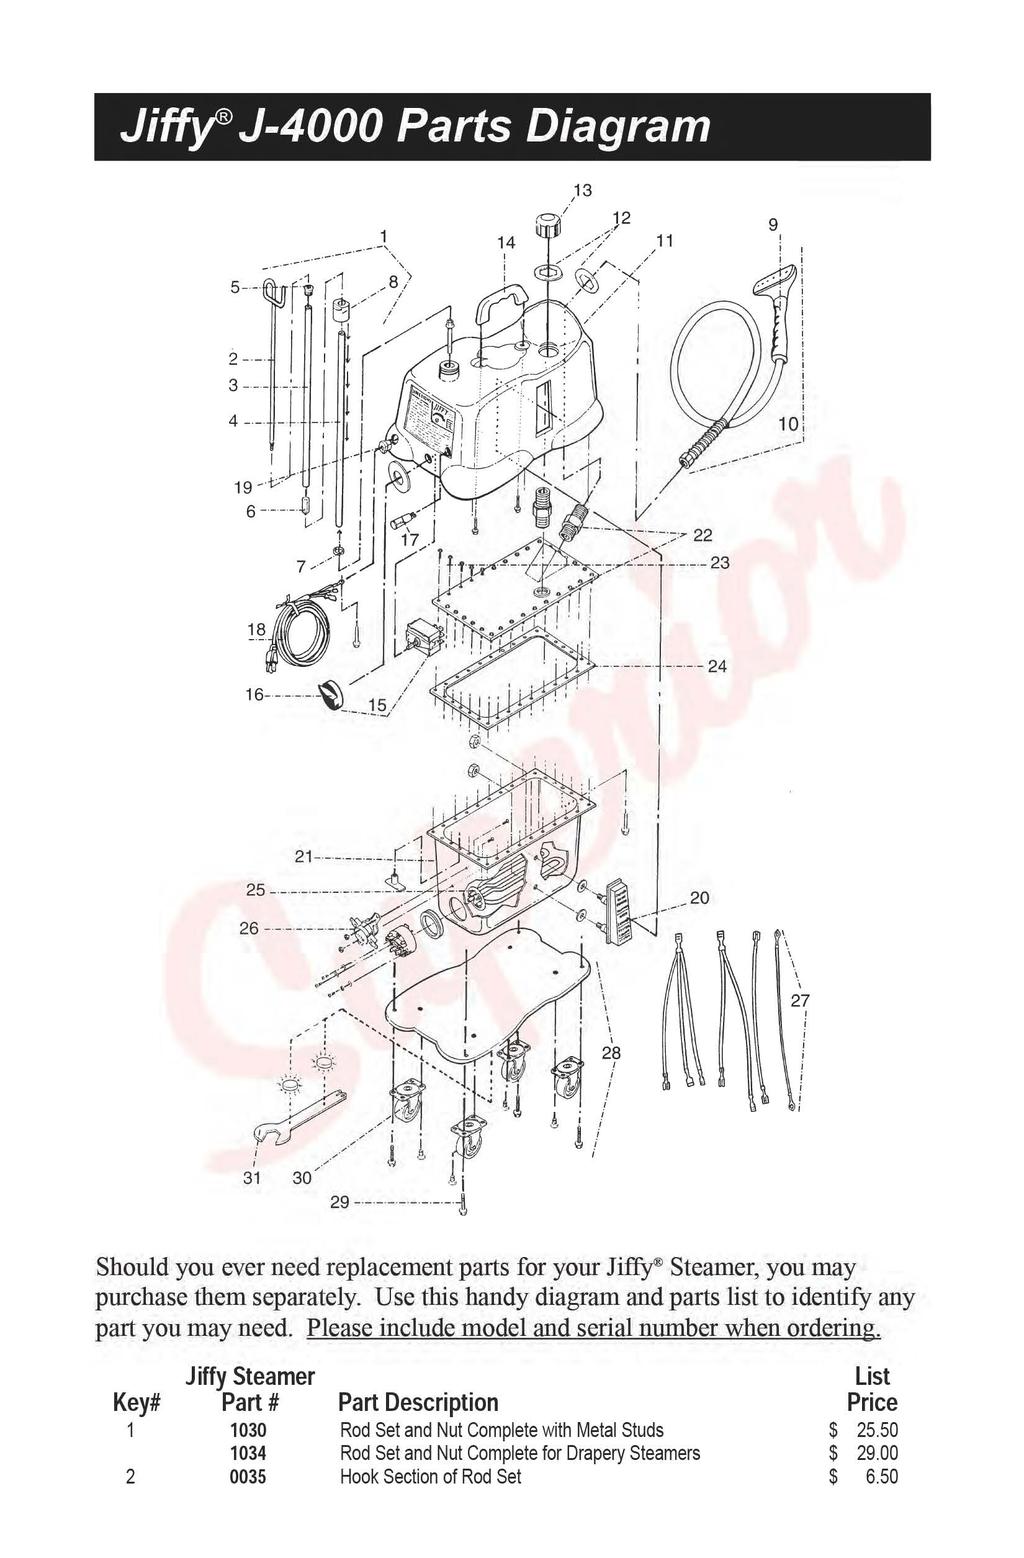 Jiffy J-4000 Parts Diagram Should you ever need replacement parts for your Ji~ Steamer, you may purchase them separately. Use this handy diagram and parts list to identify any part you may need.